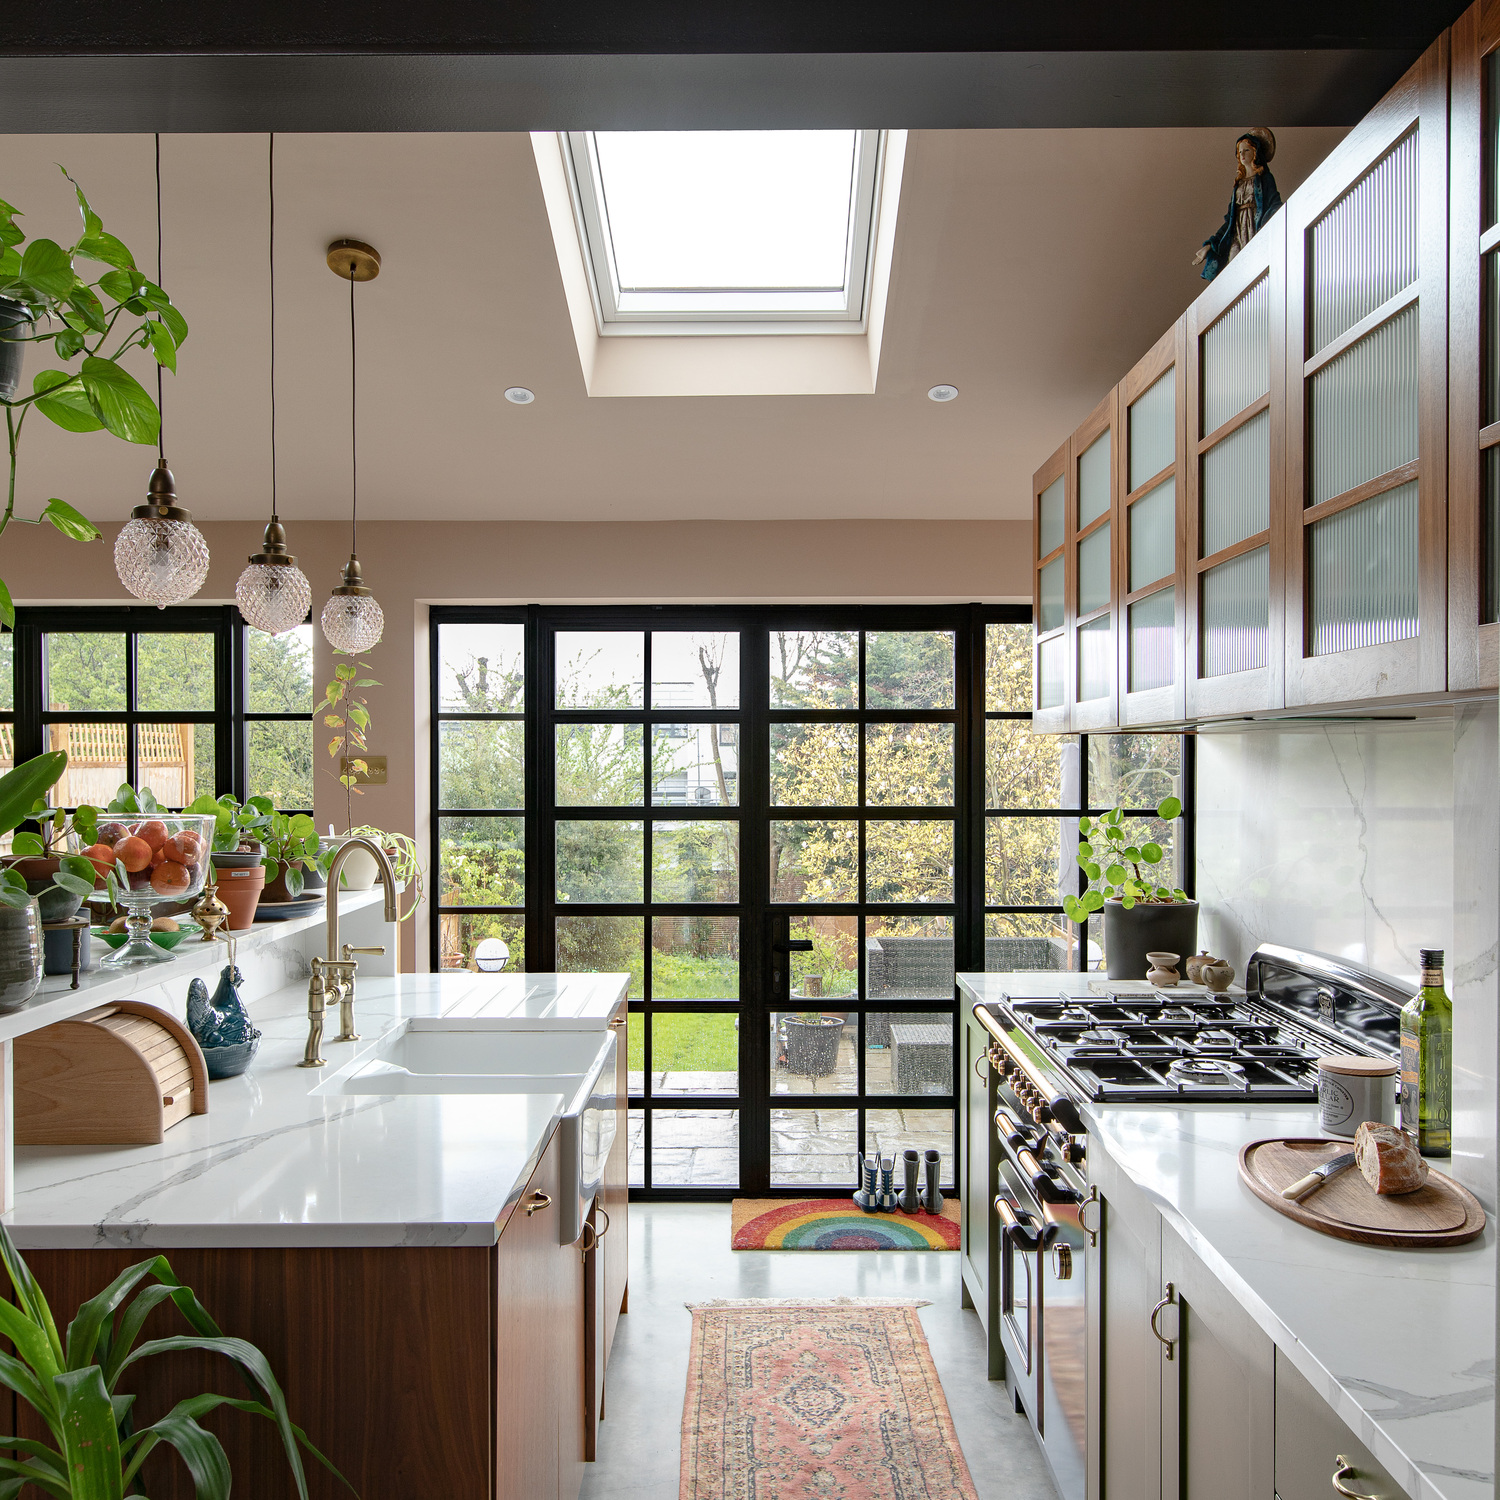  A scene of tranquillity at this homely kitchen in South East London 